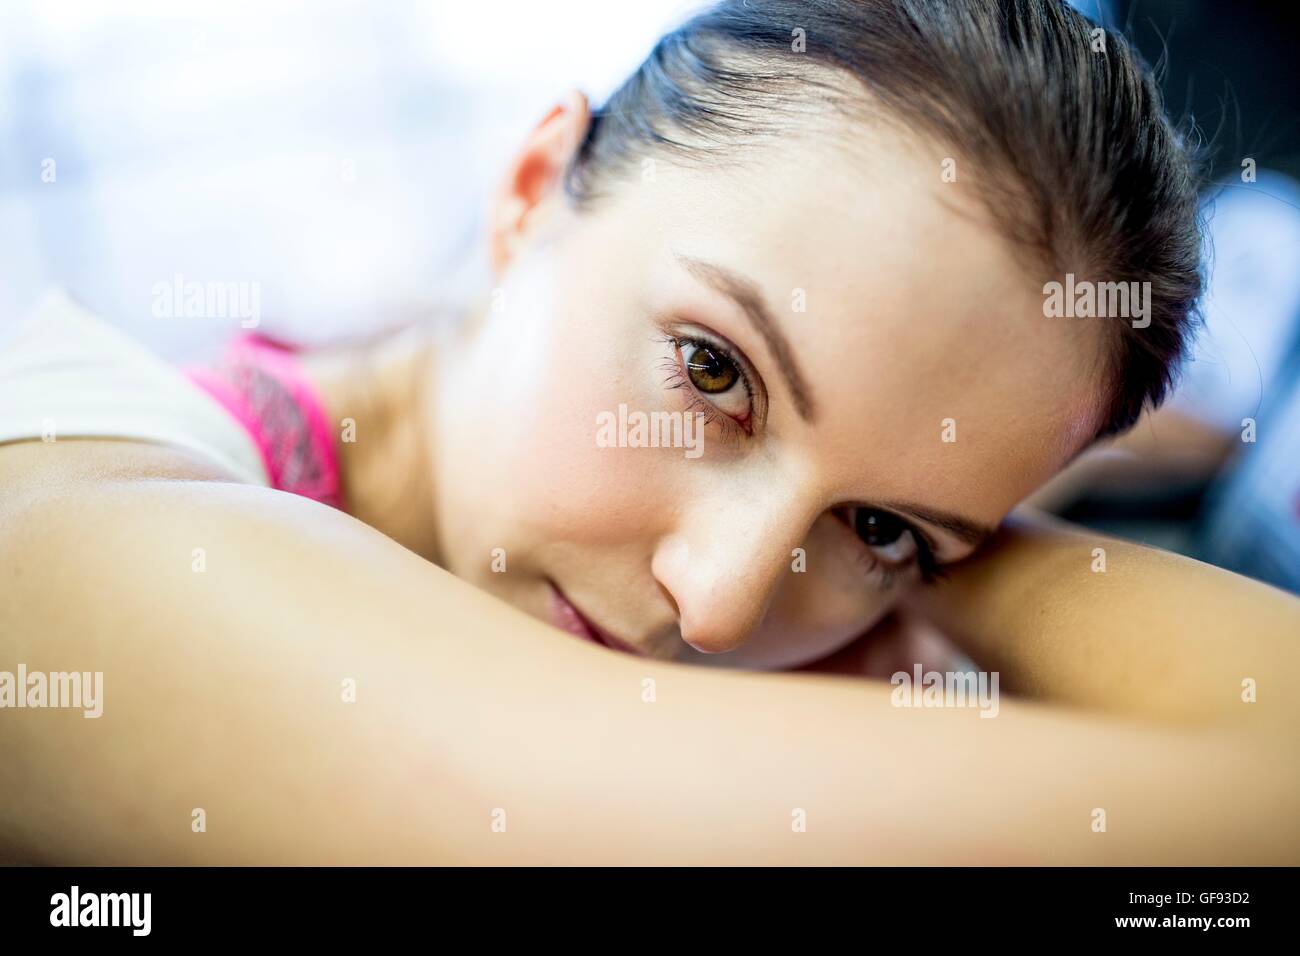 PROPERTY RELEASED. MODEL RELEASED. Close-up of young woman resting on exercise machine in gym, portrait. Stock Photo